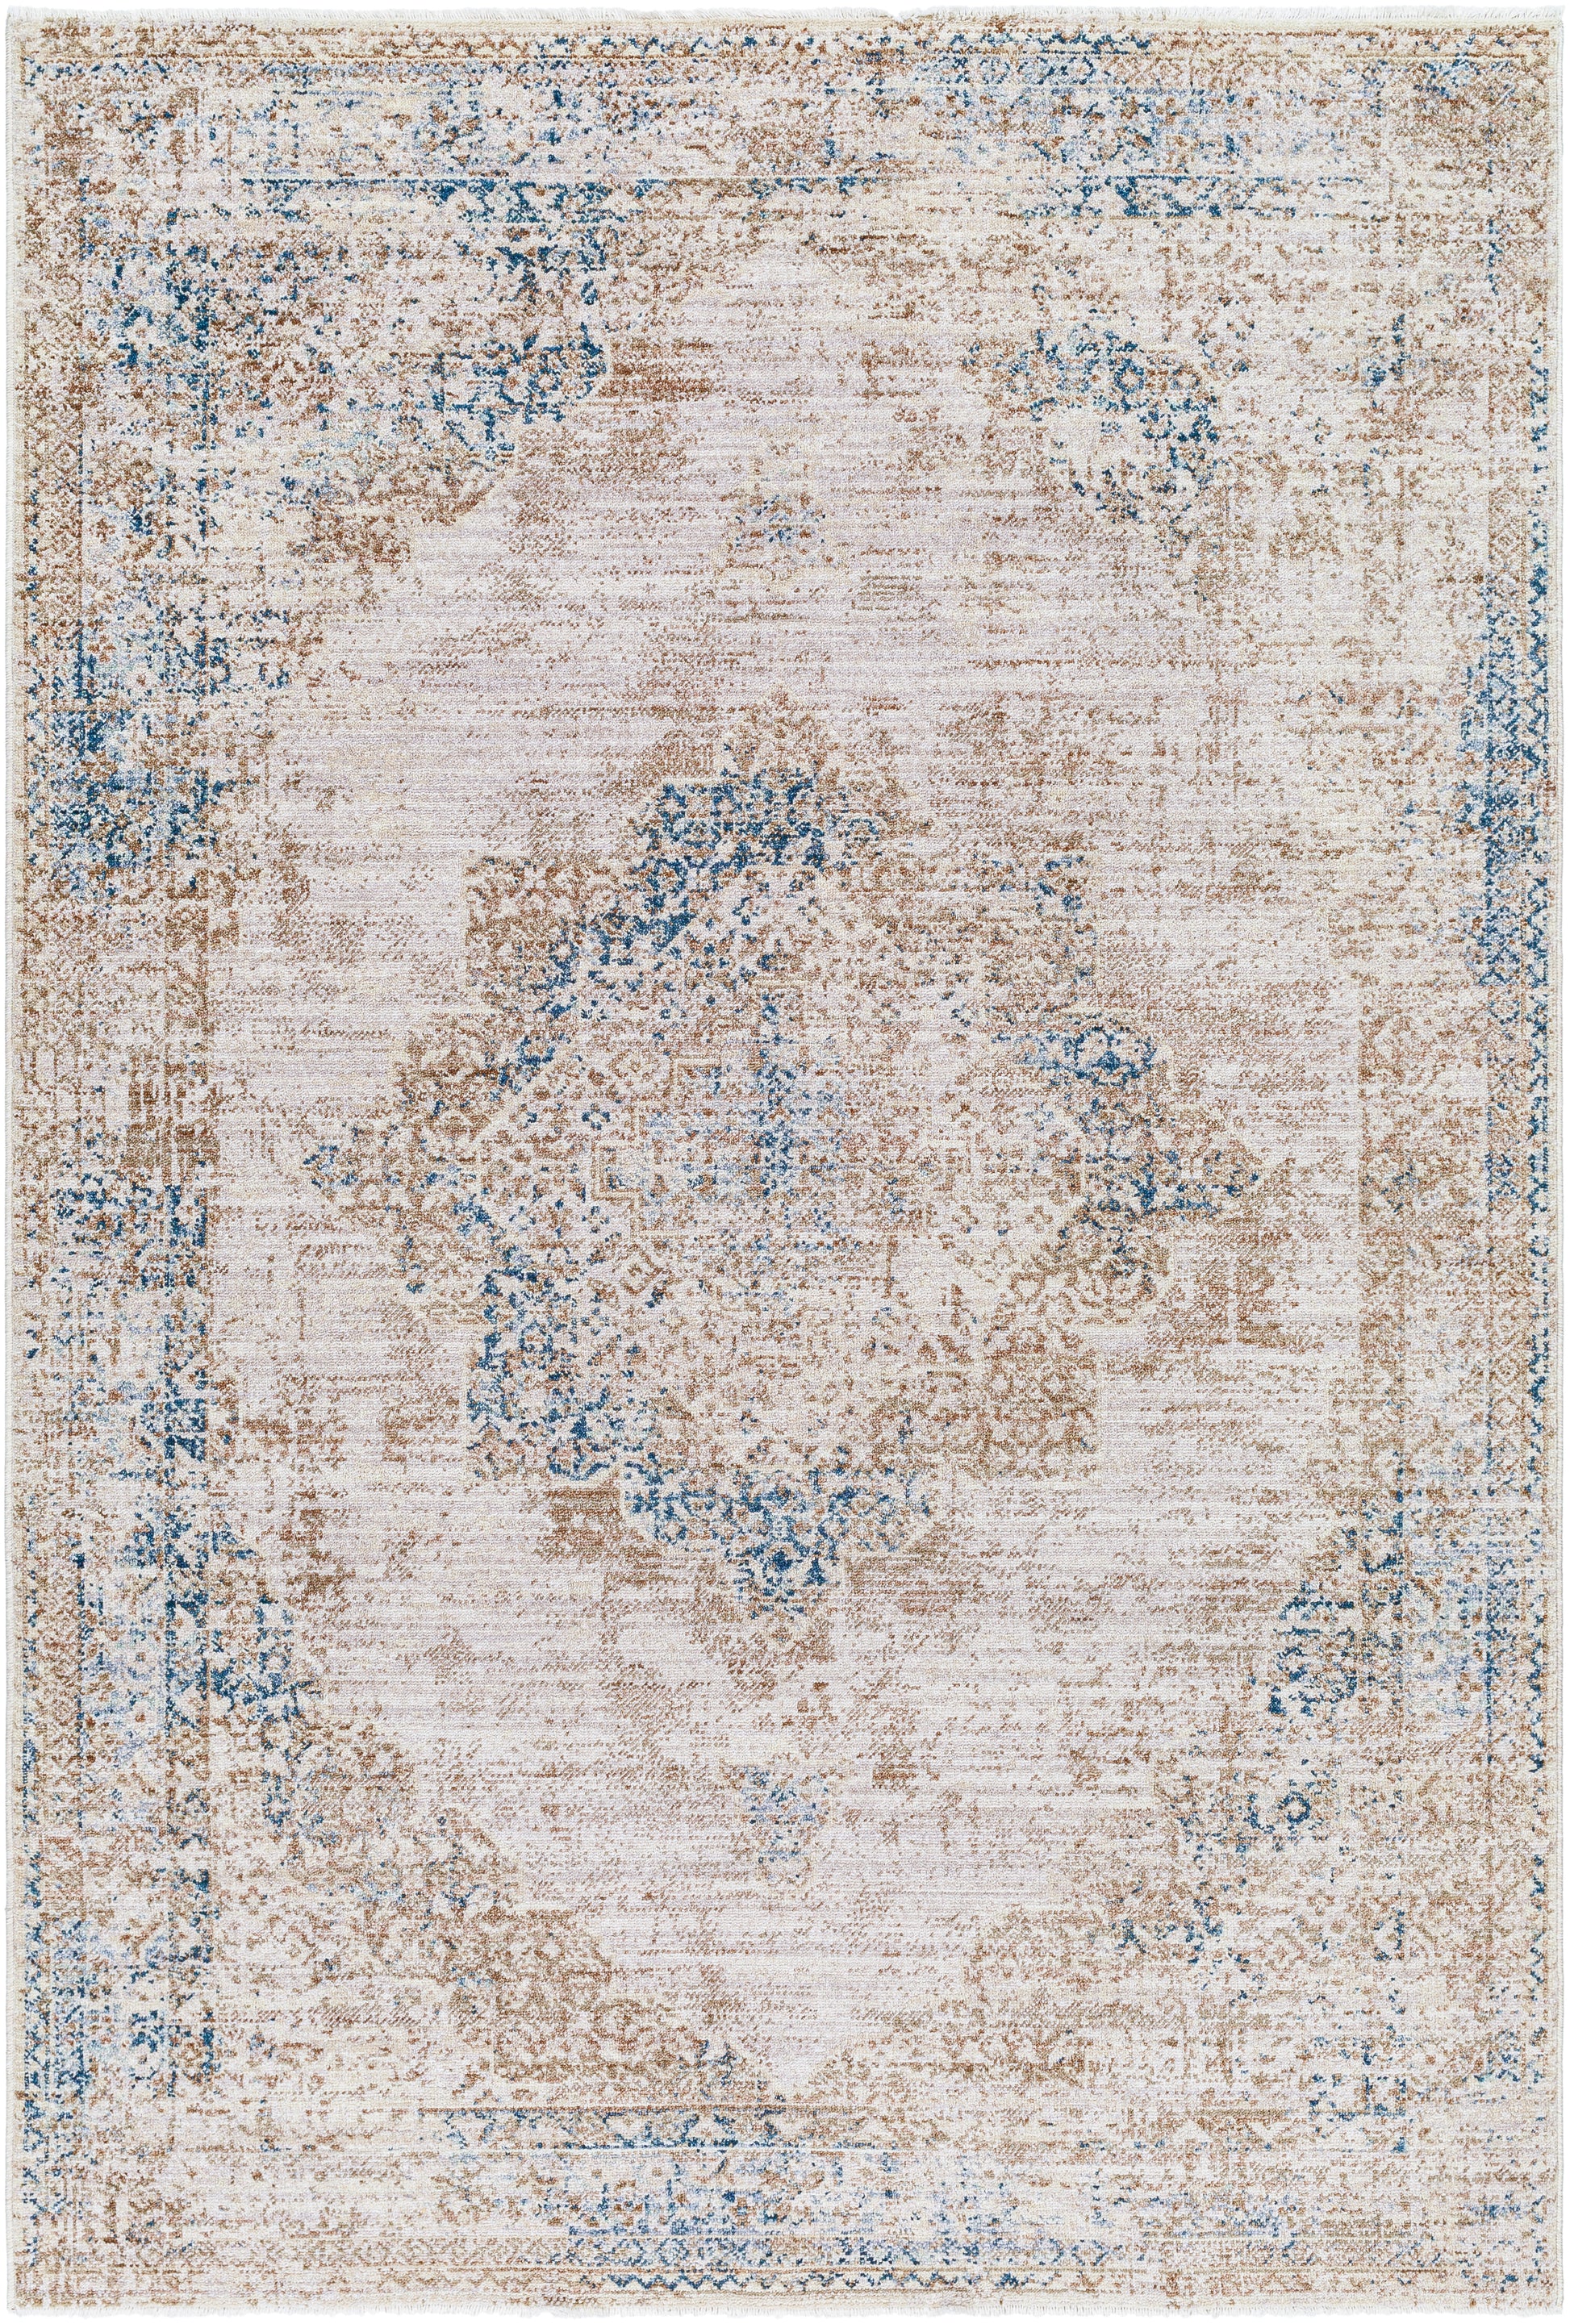 Surya Montreal Mtr-2305 Taupe, Gray, Teal, Dusty Sage, Cream Area Rug